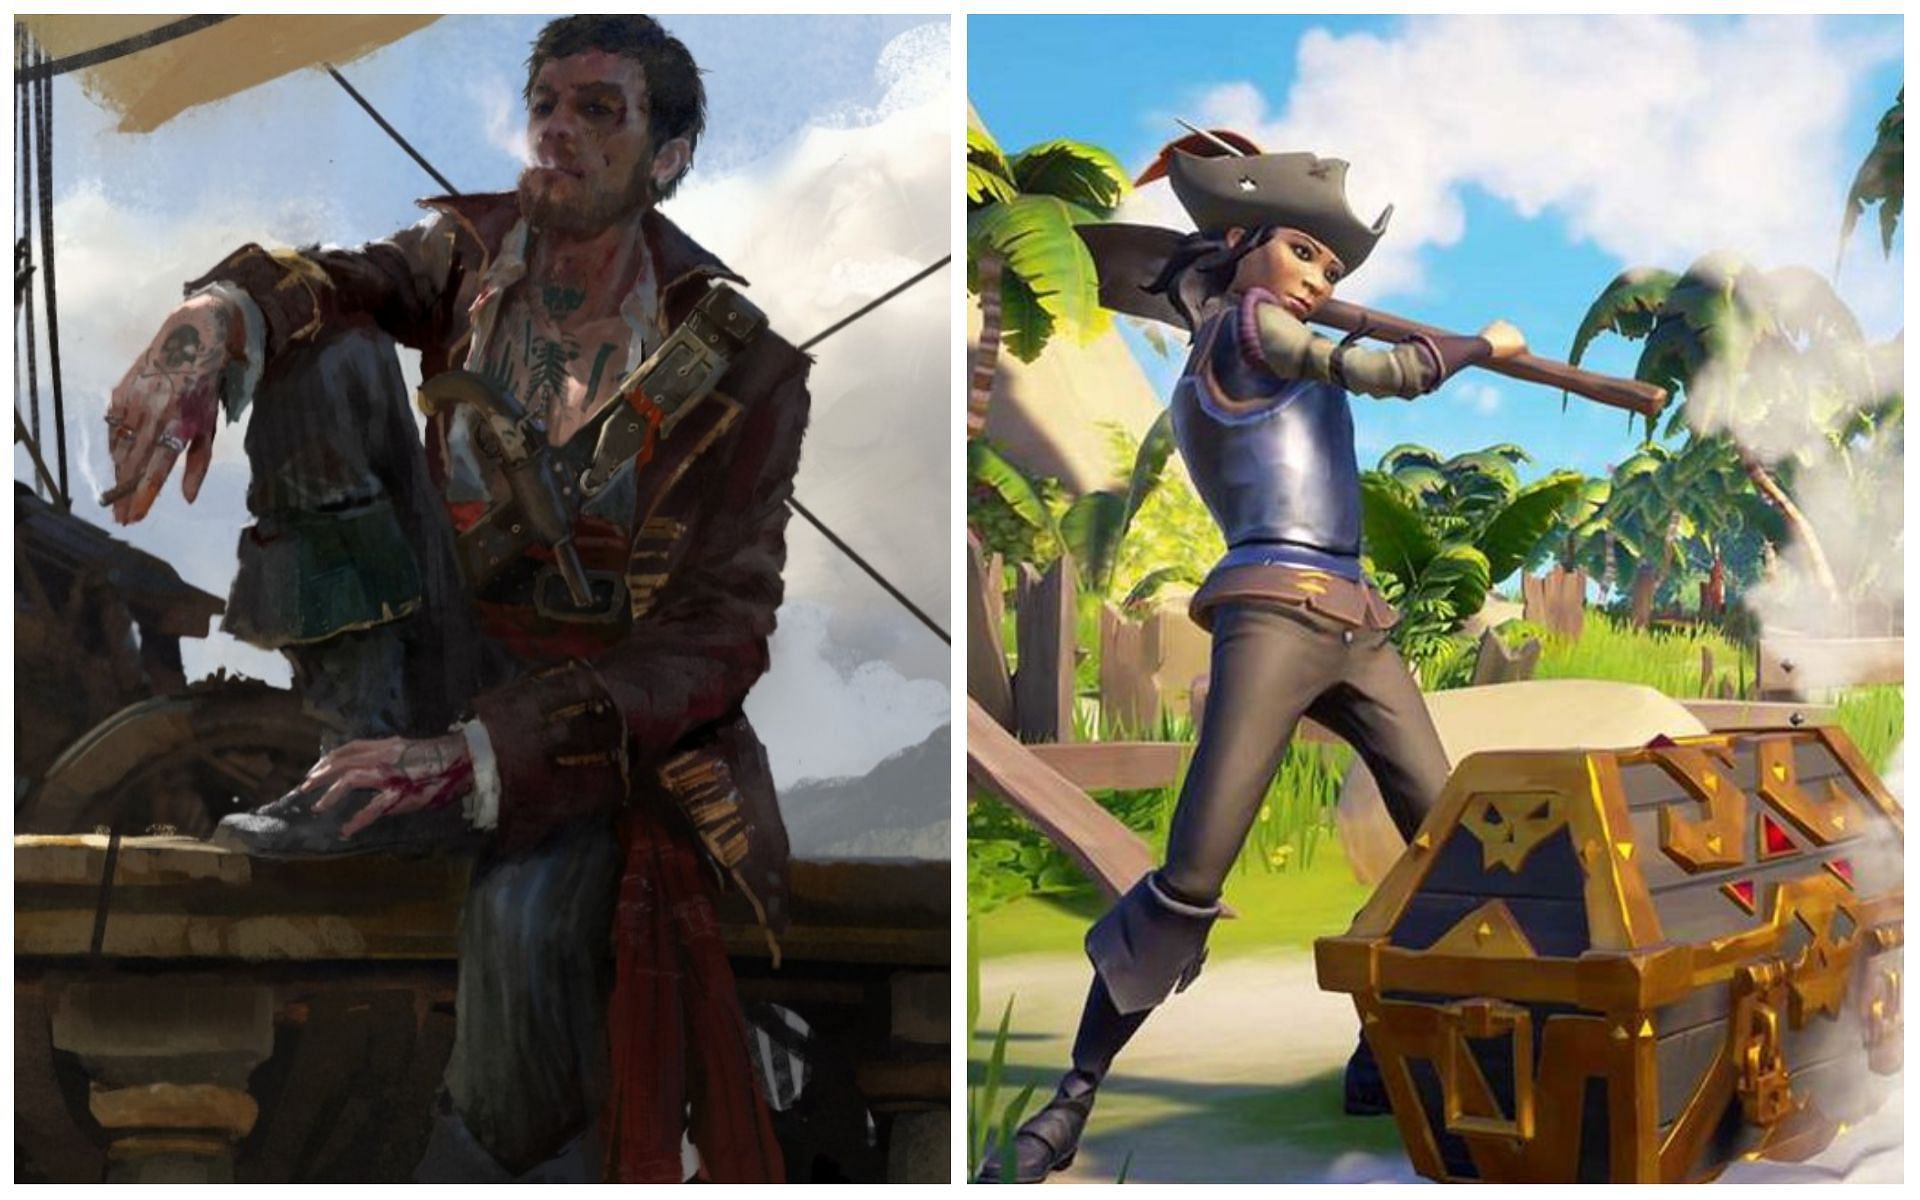 There seem to be many more differences than similarities between the two games (Image via Ubisoft / Rare)